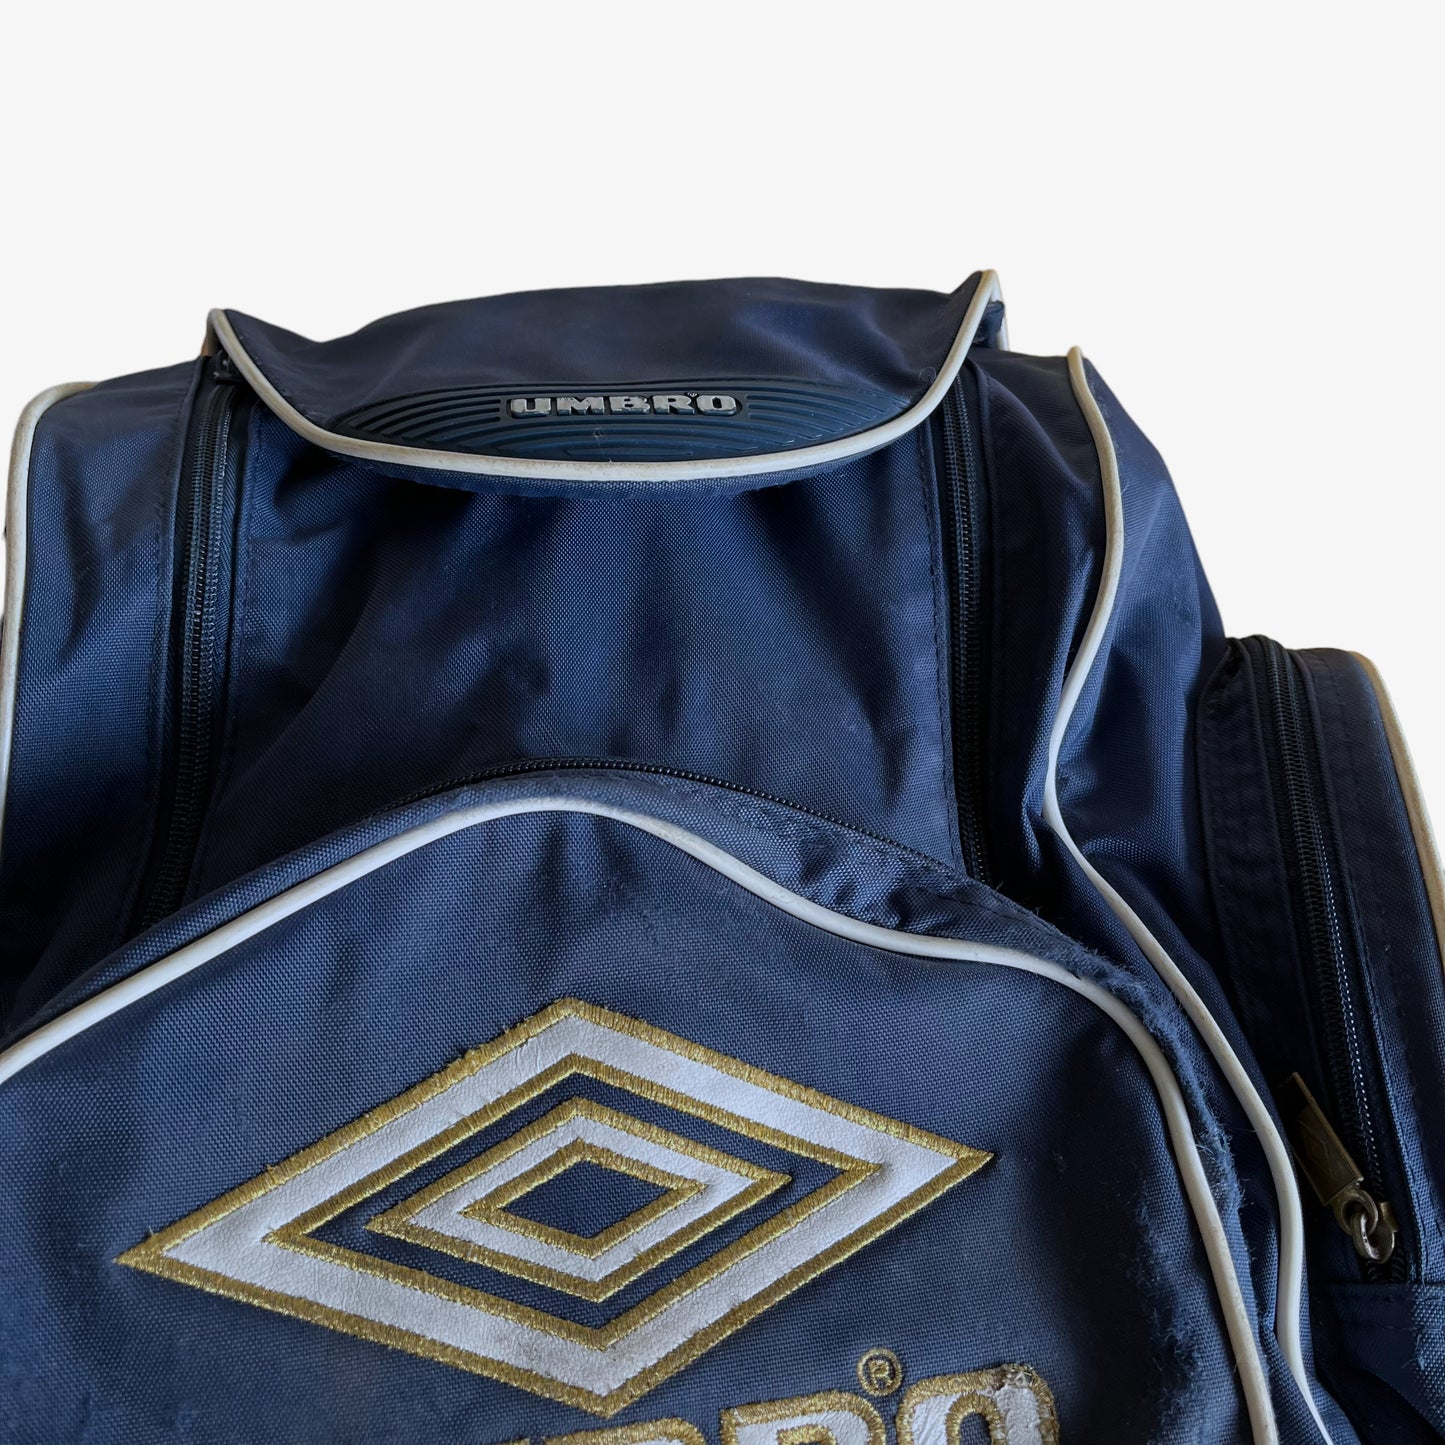 Vintage 90s Umbro Sports Big Blue Backpack Featuring An Embroidered Spell Out Logo Y2K - Casspios Dream